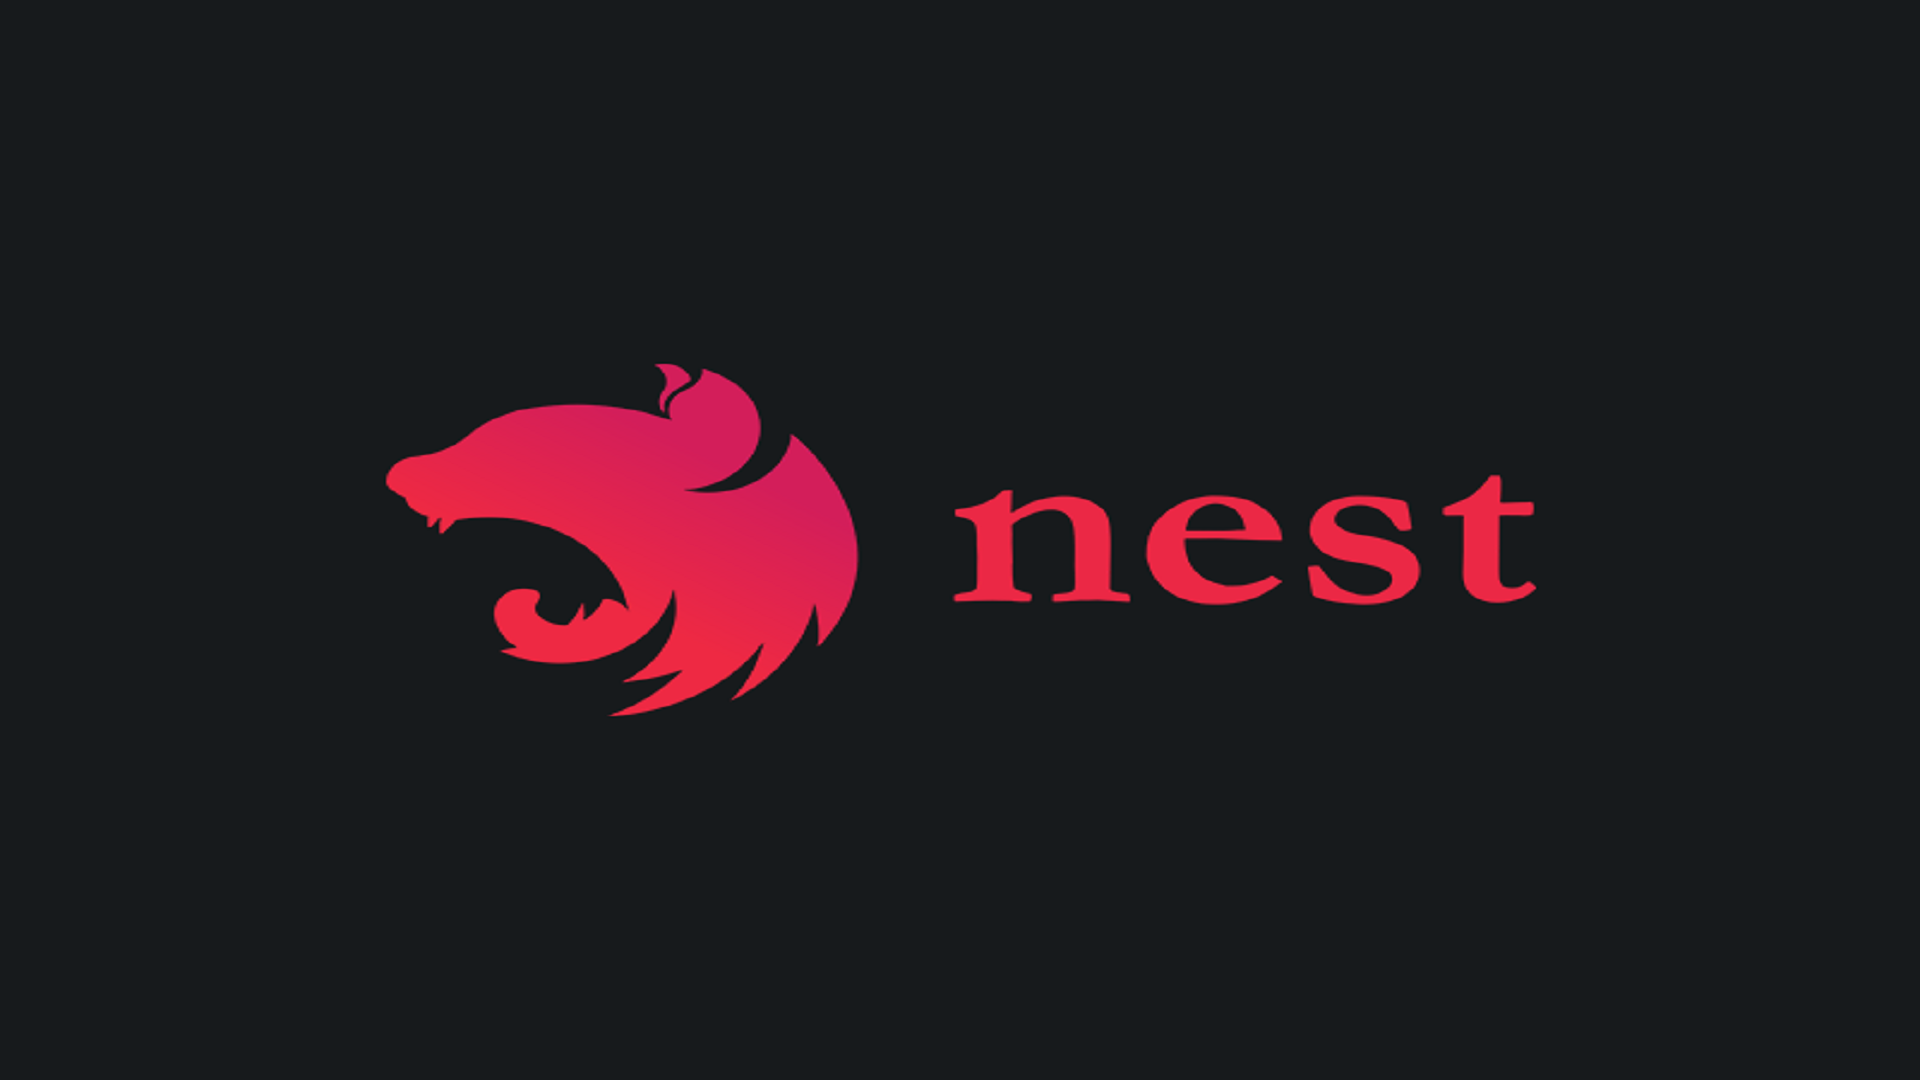 Getting Started With NestJS